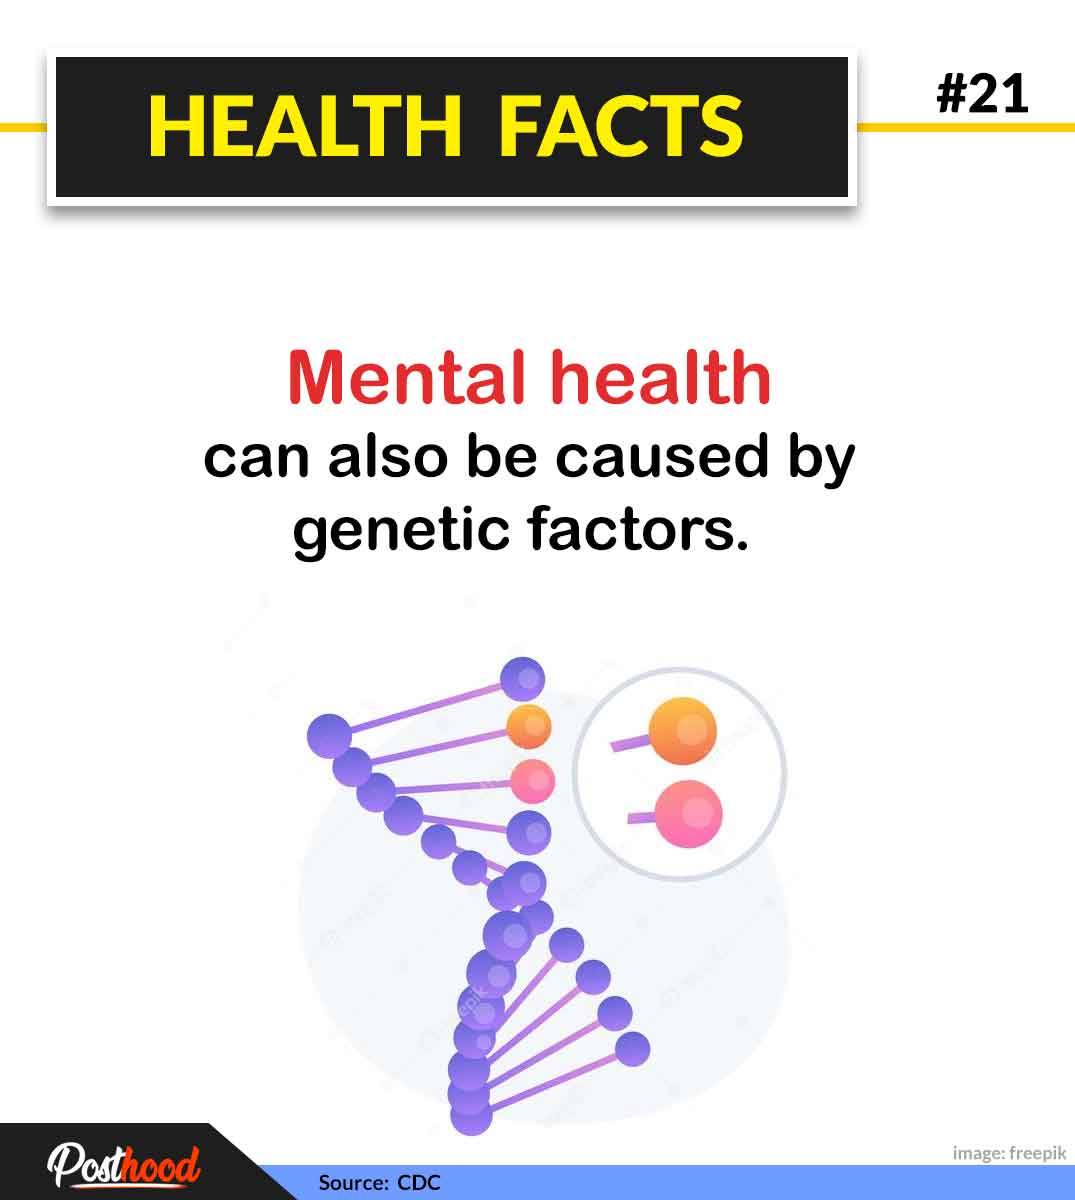 60 amazing science proven health facts about mental health that will surprise you insanely. General health facts about human mind.